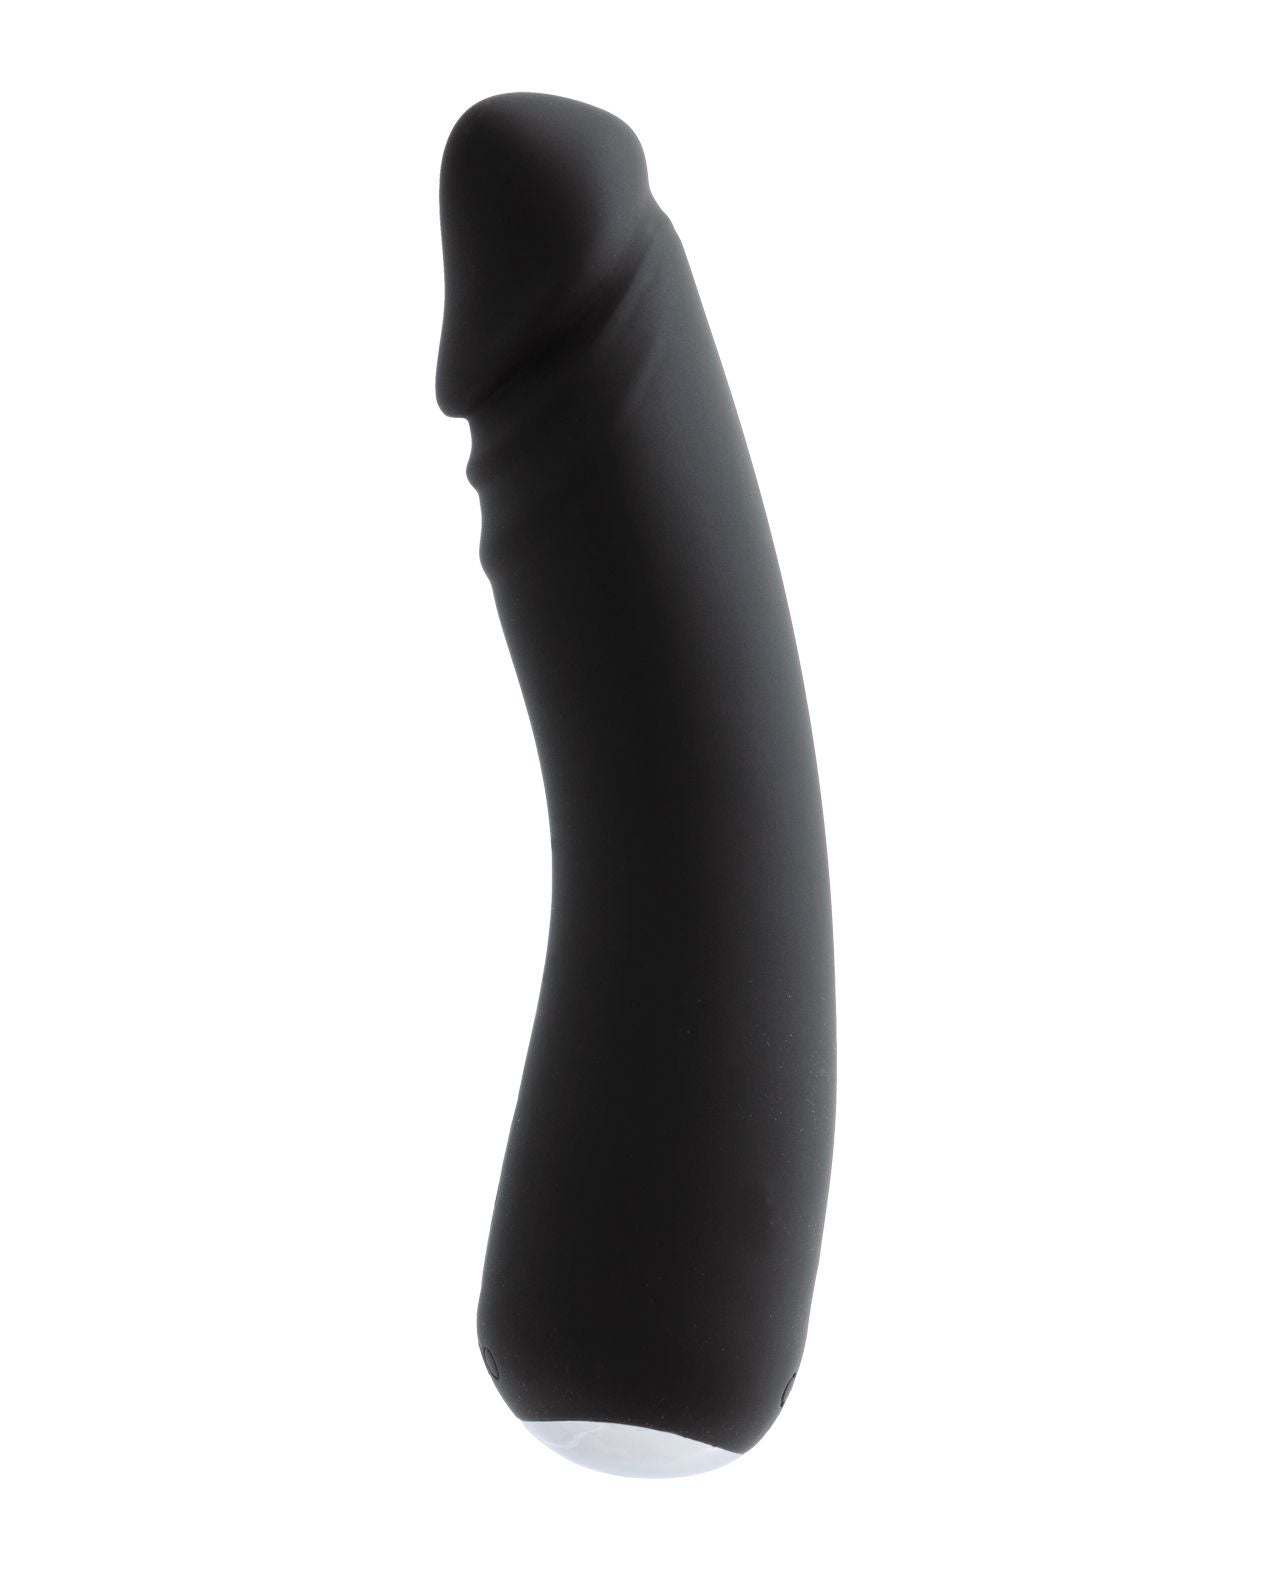 Side view of the vibrator showing its ergonomic curved shape for G-spot pleasure (black).